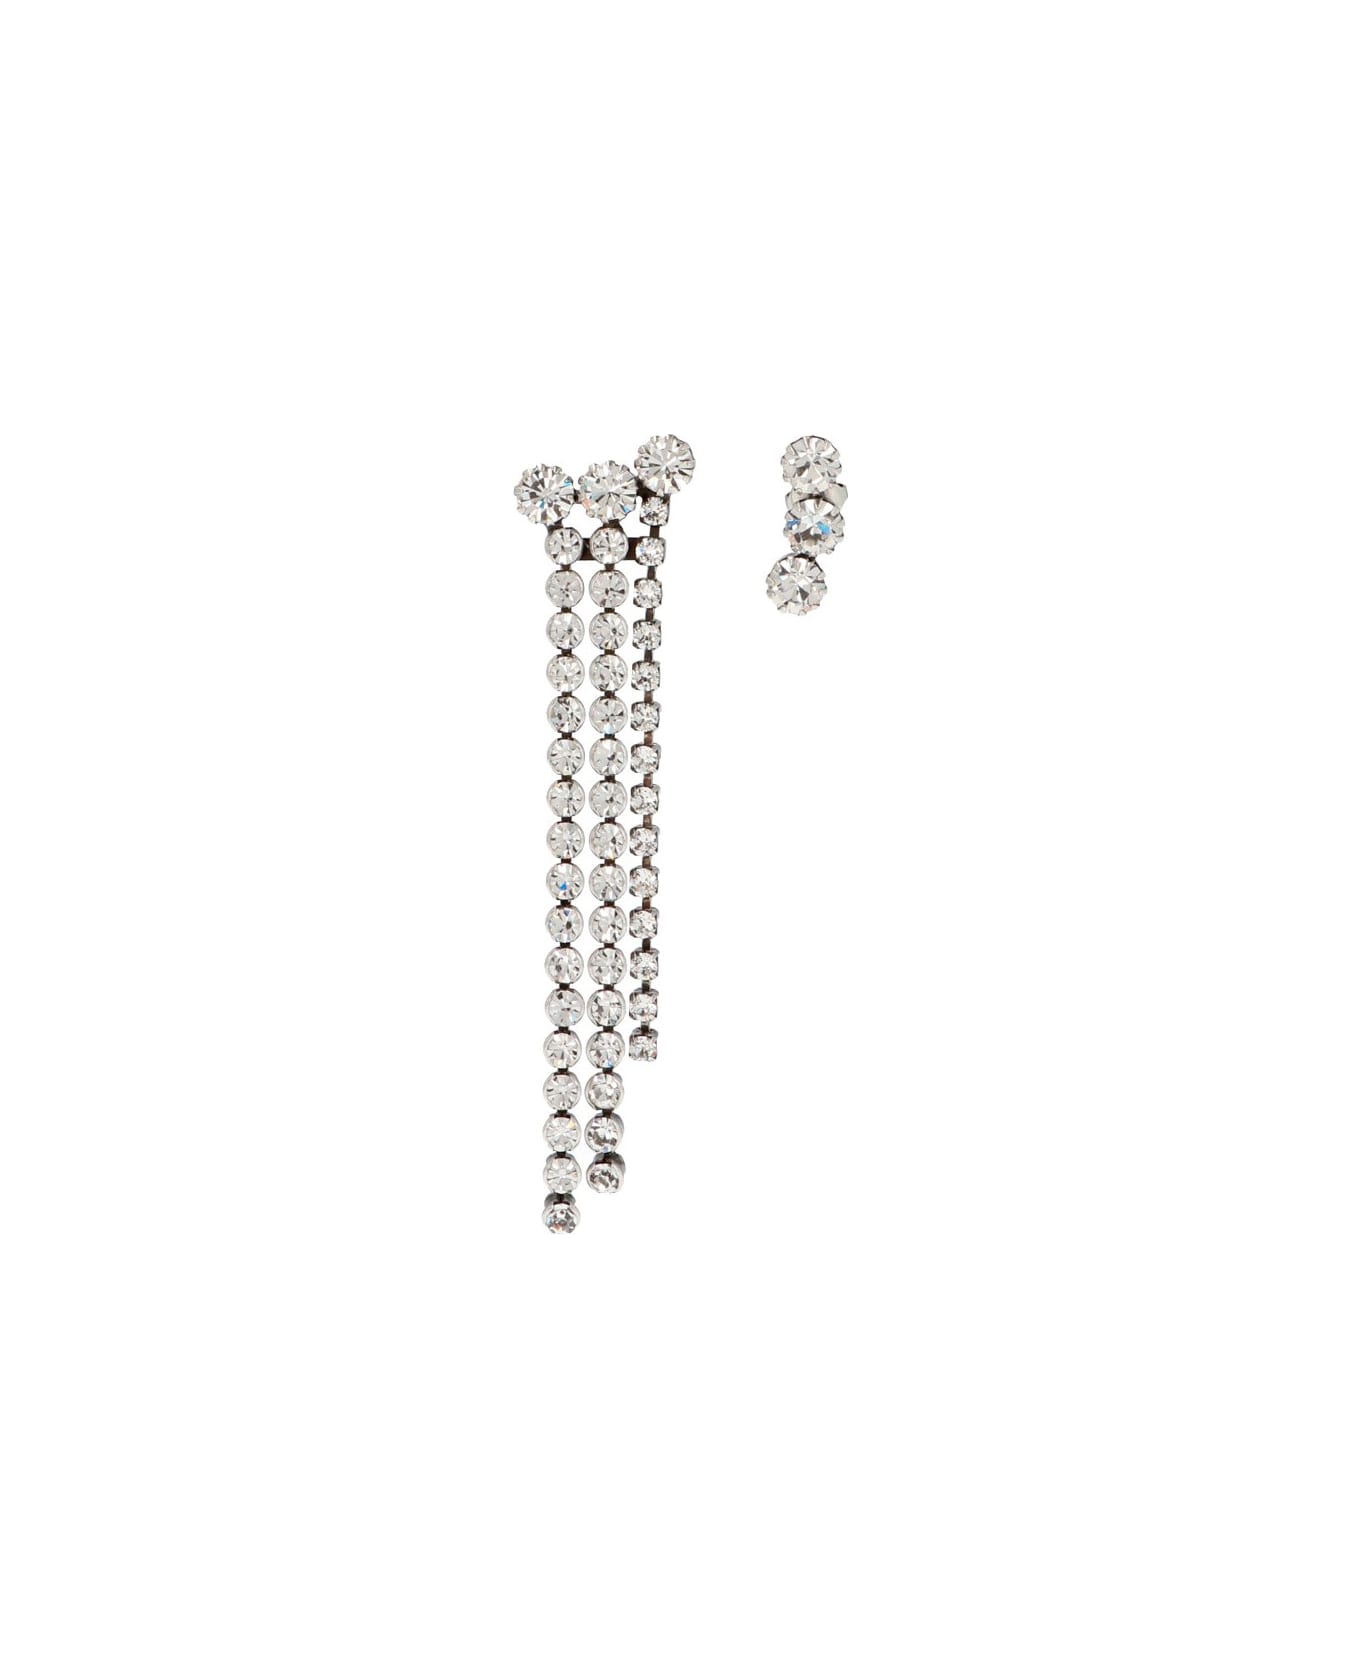 Isabel Marant Boucle D'oreill' Earrings - Silver ジュエリー